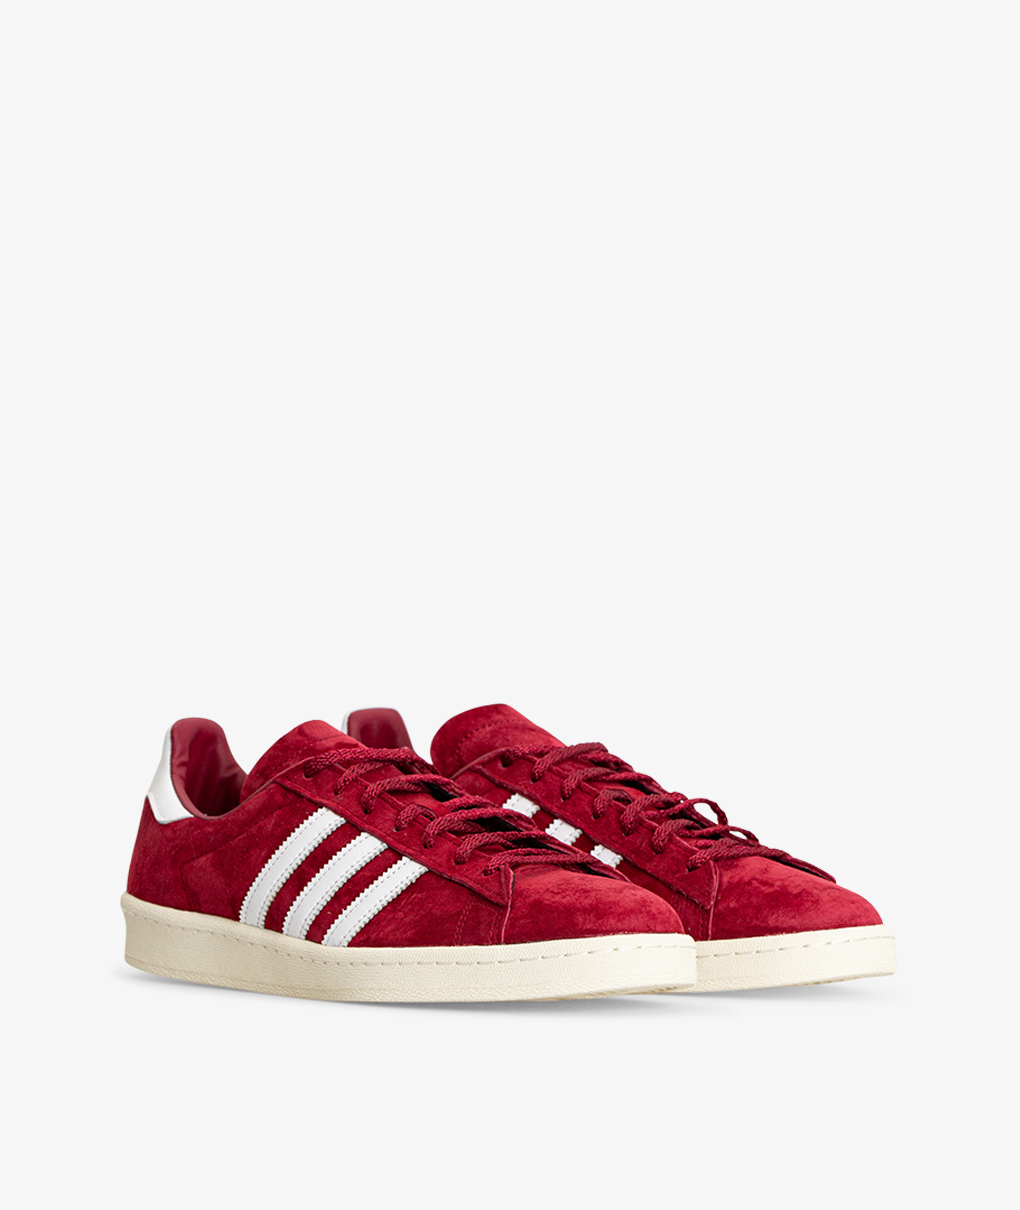 Norse Store | Shipping Worldwide - Sneakers - adidas Originals 